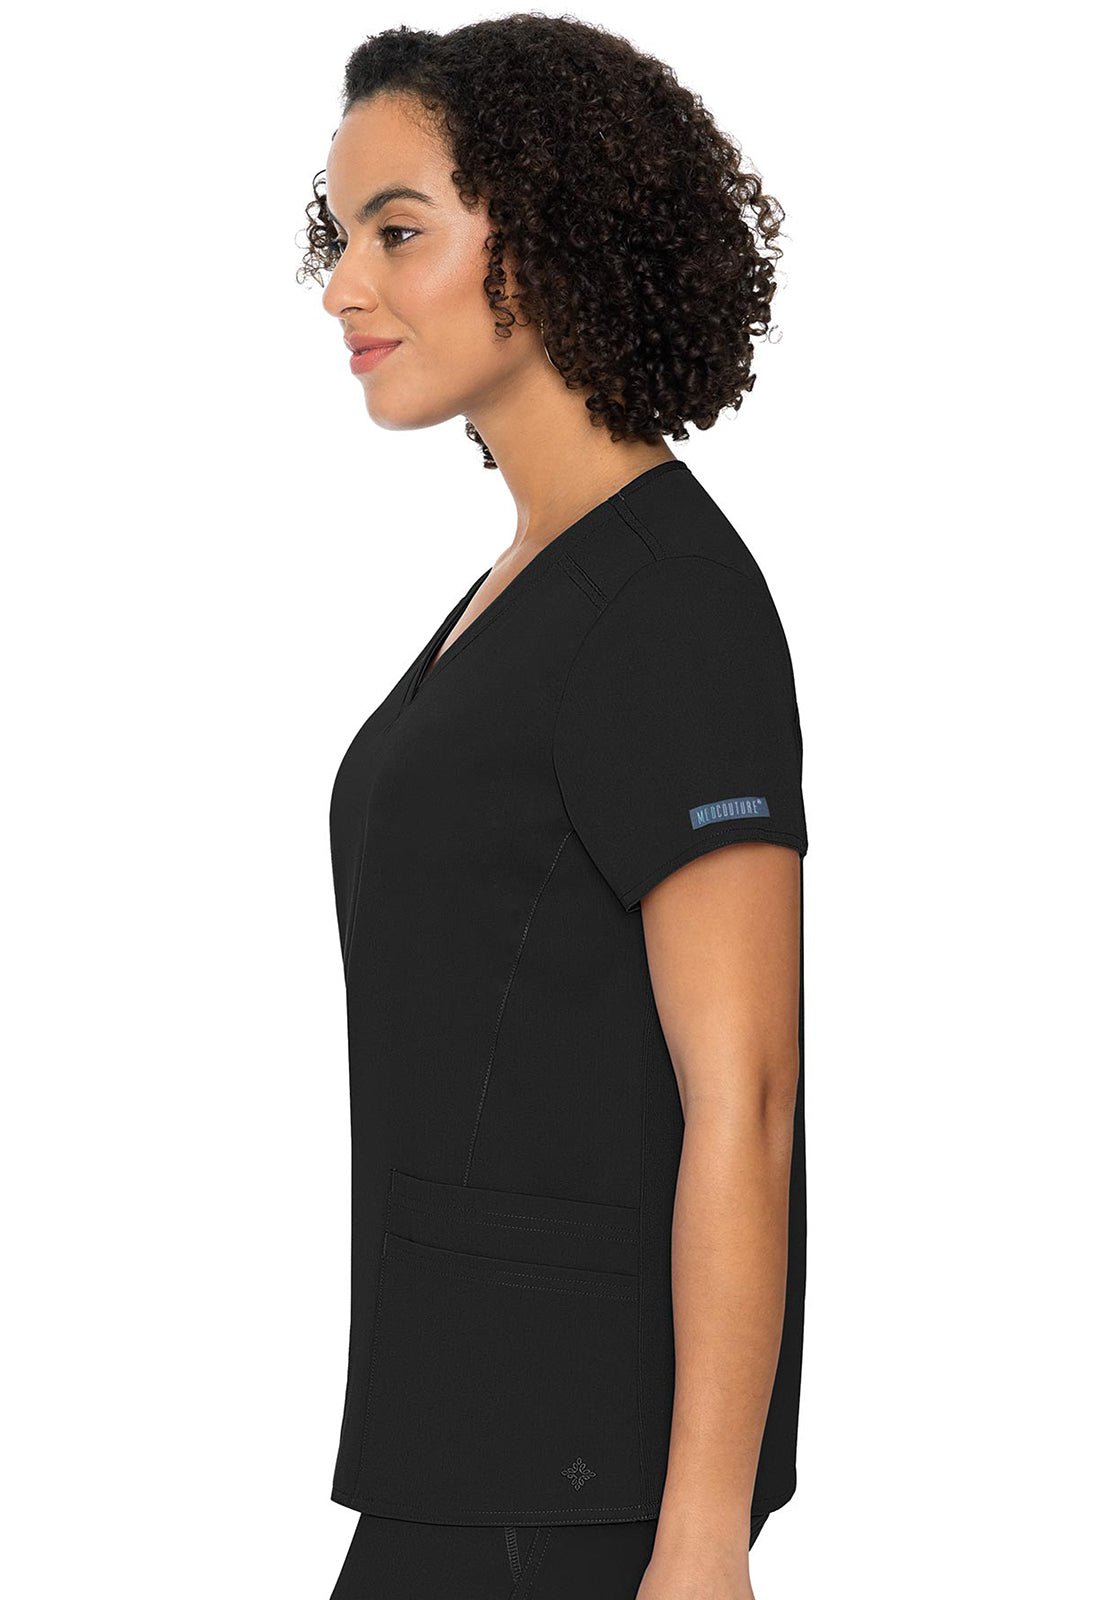 Med Couture Touch V Neck Scrub Top MC7468 in Black, Navy, Pewter, Royal - Scrubs Select